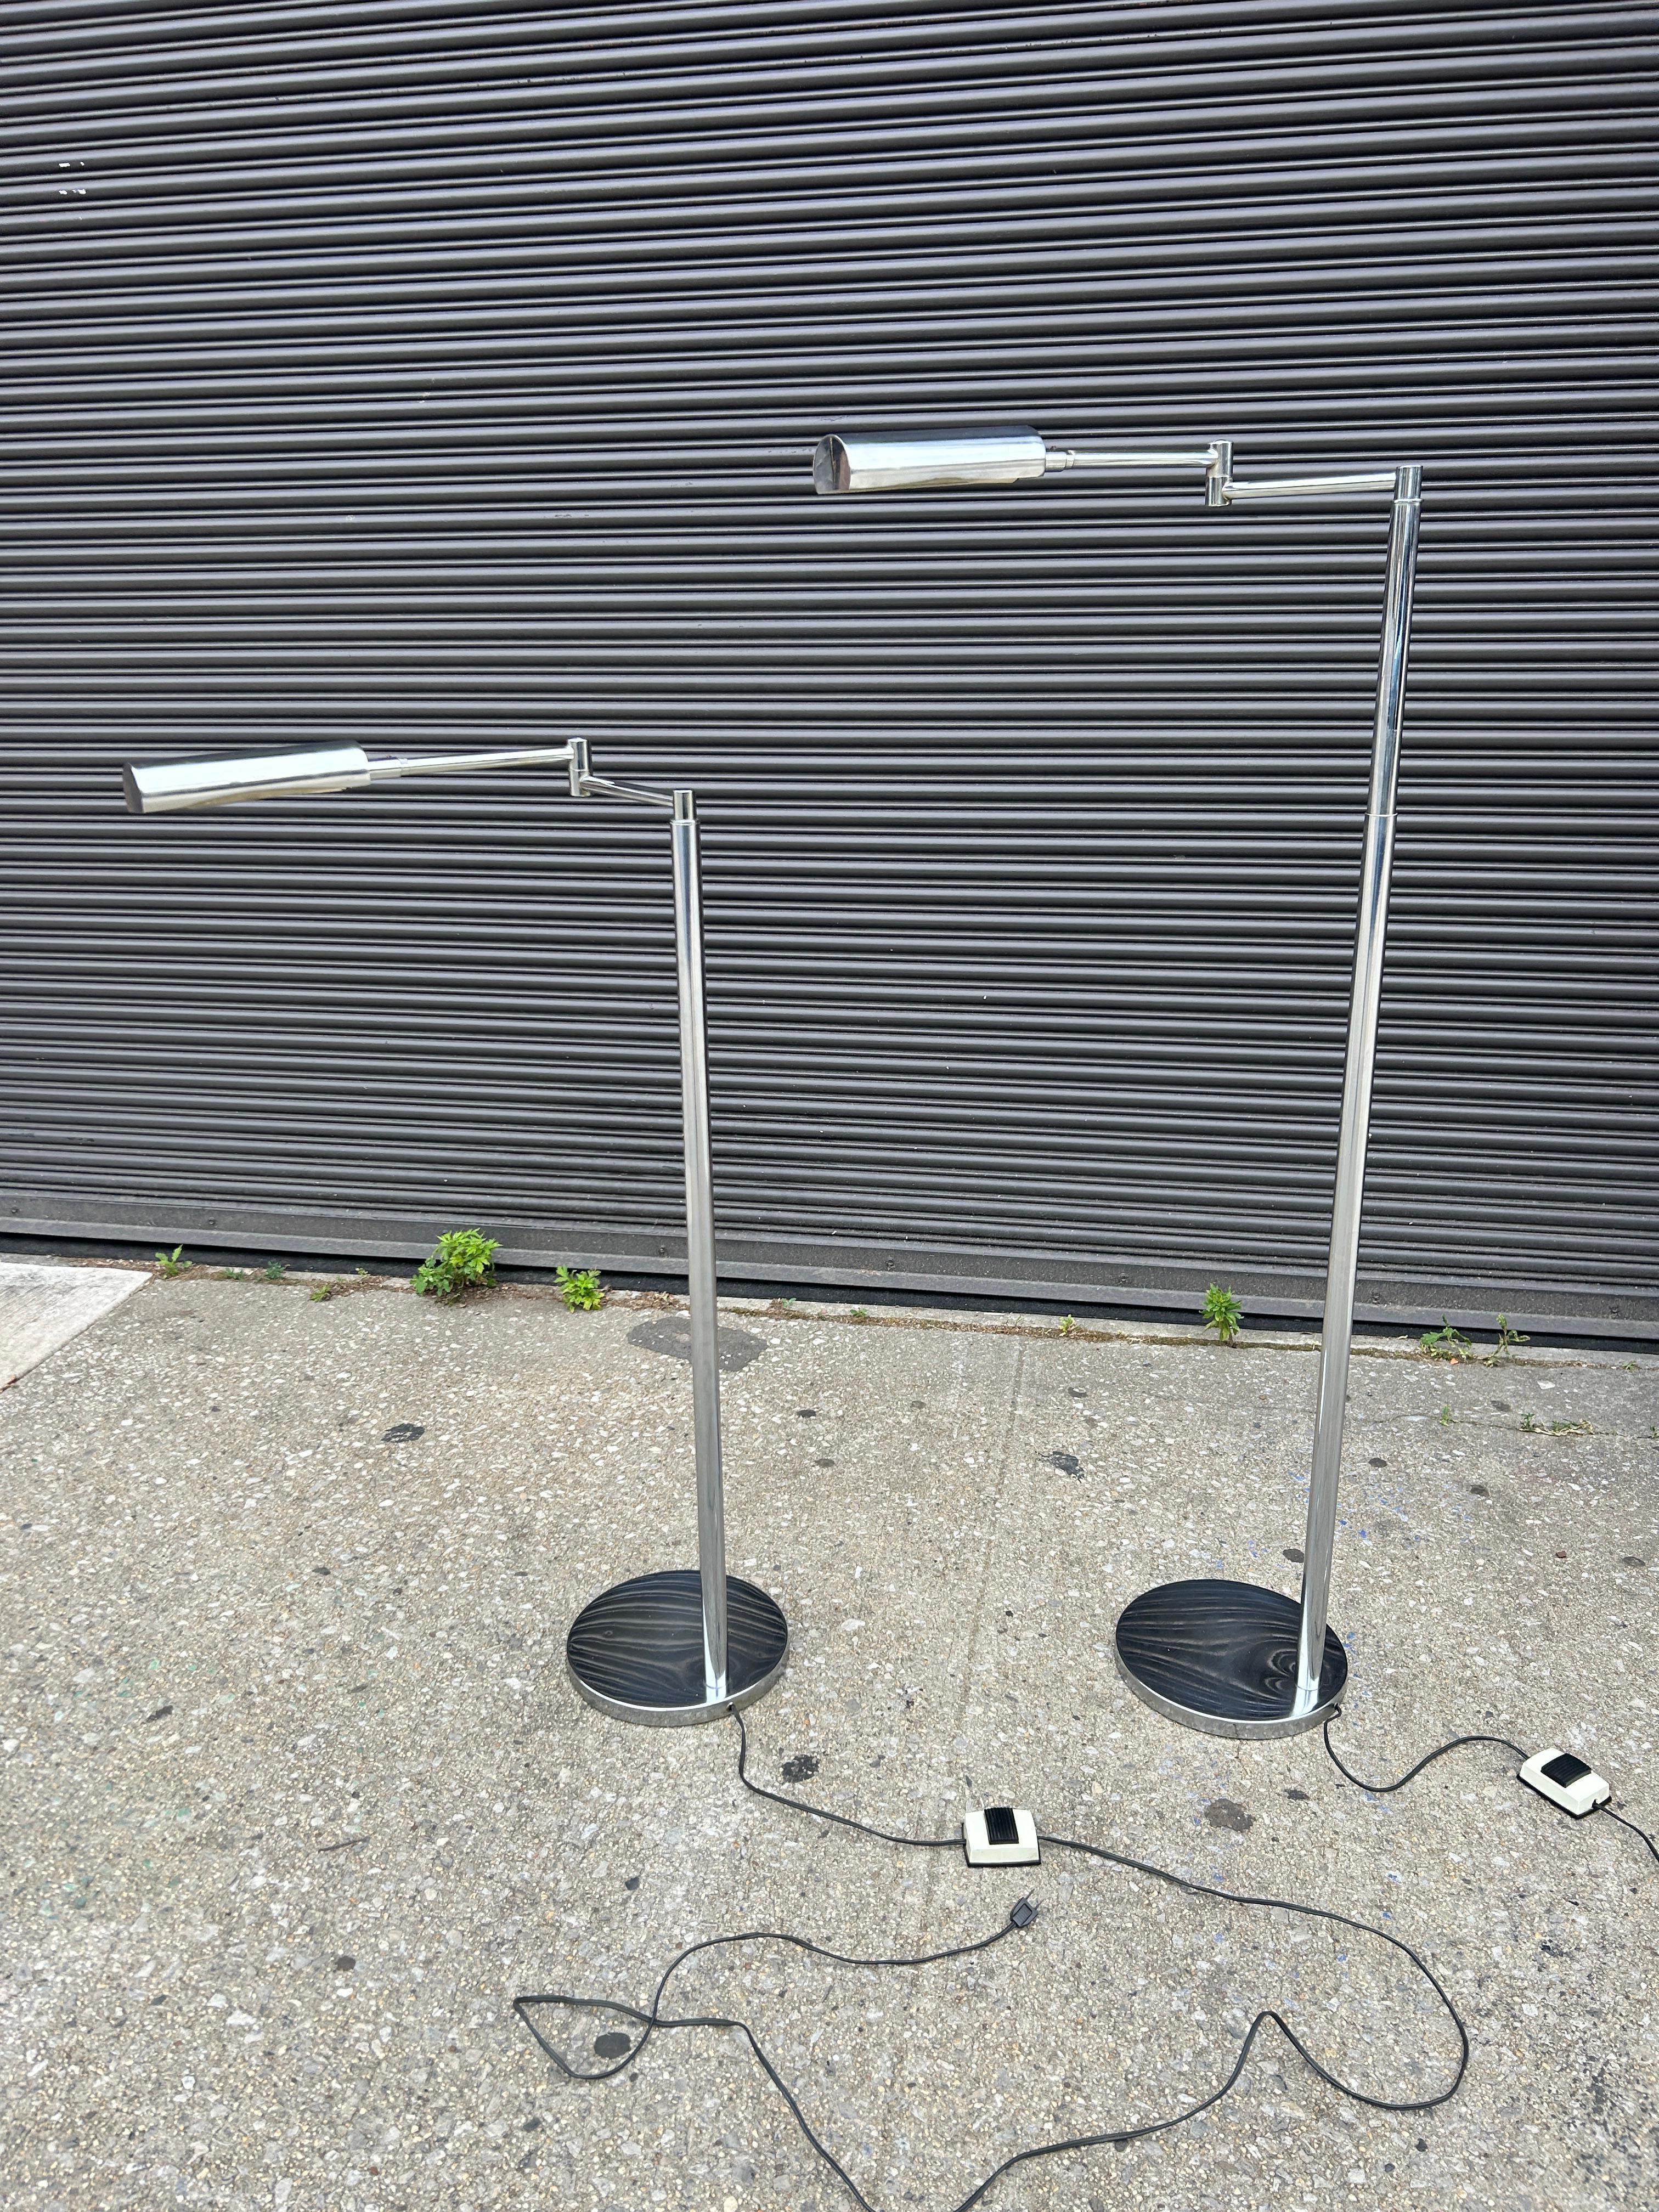 American Pair of Mid century modern chrome articulating Floor Lamps circa 1970 For Sale